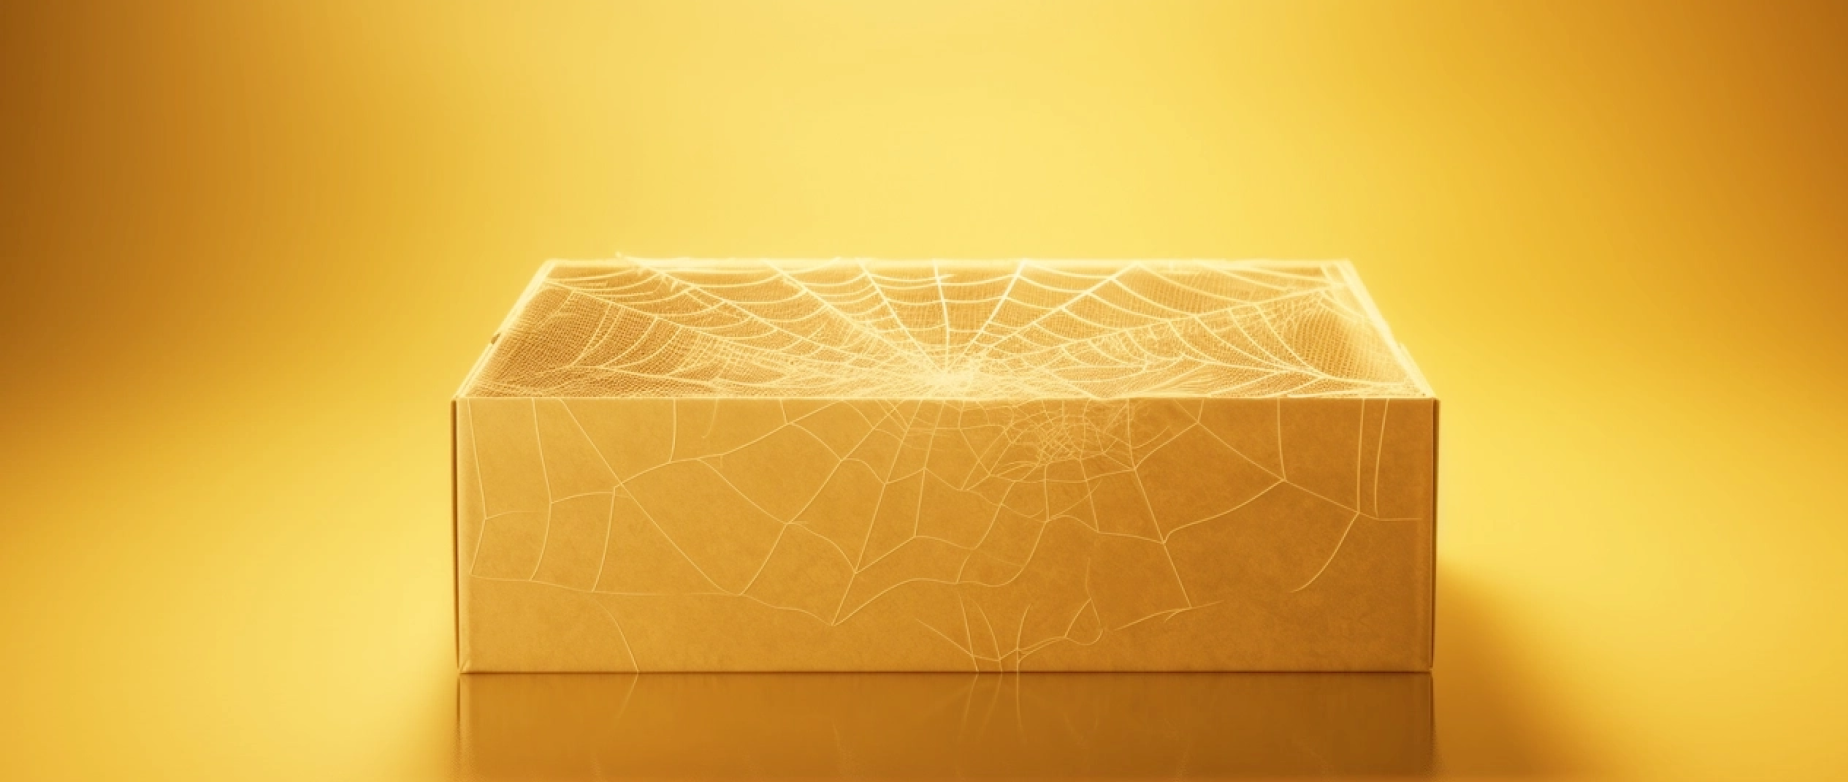 A cardboard box covered with spider webs on a gold background.